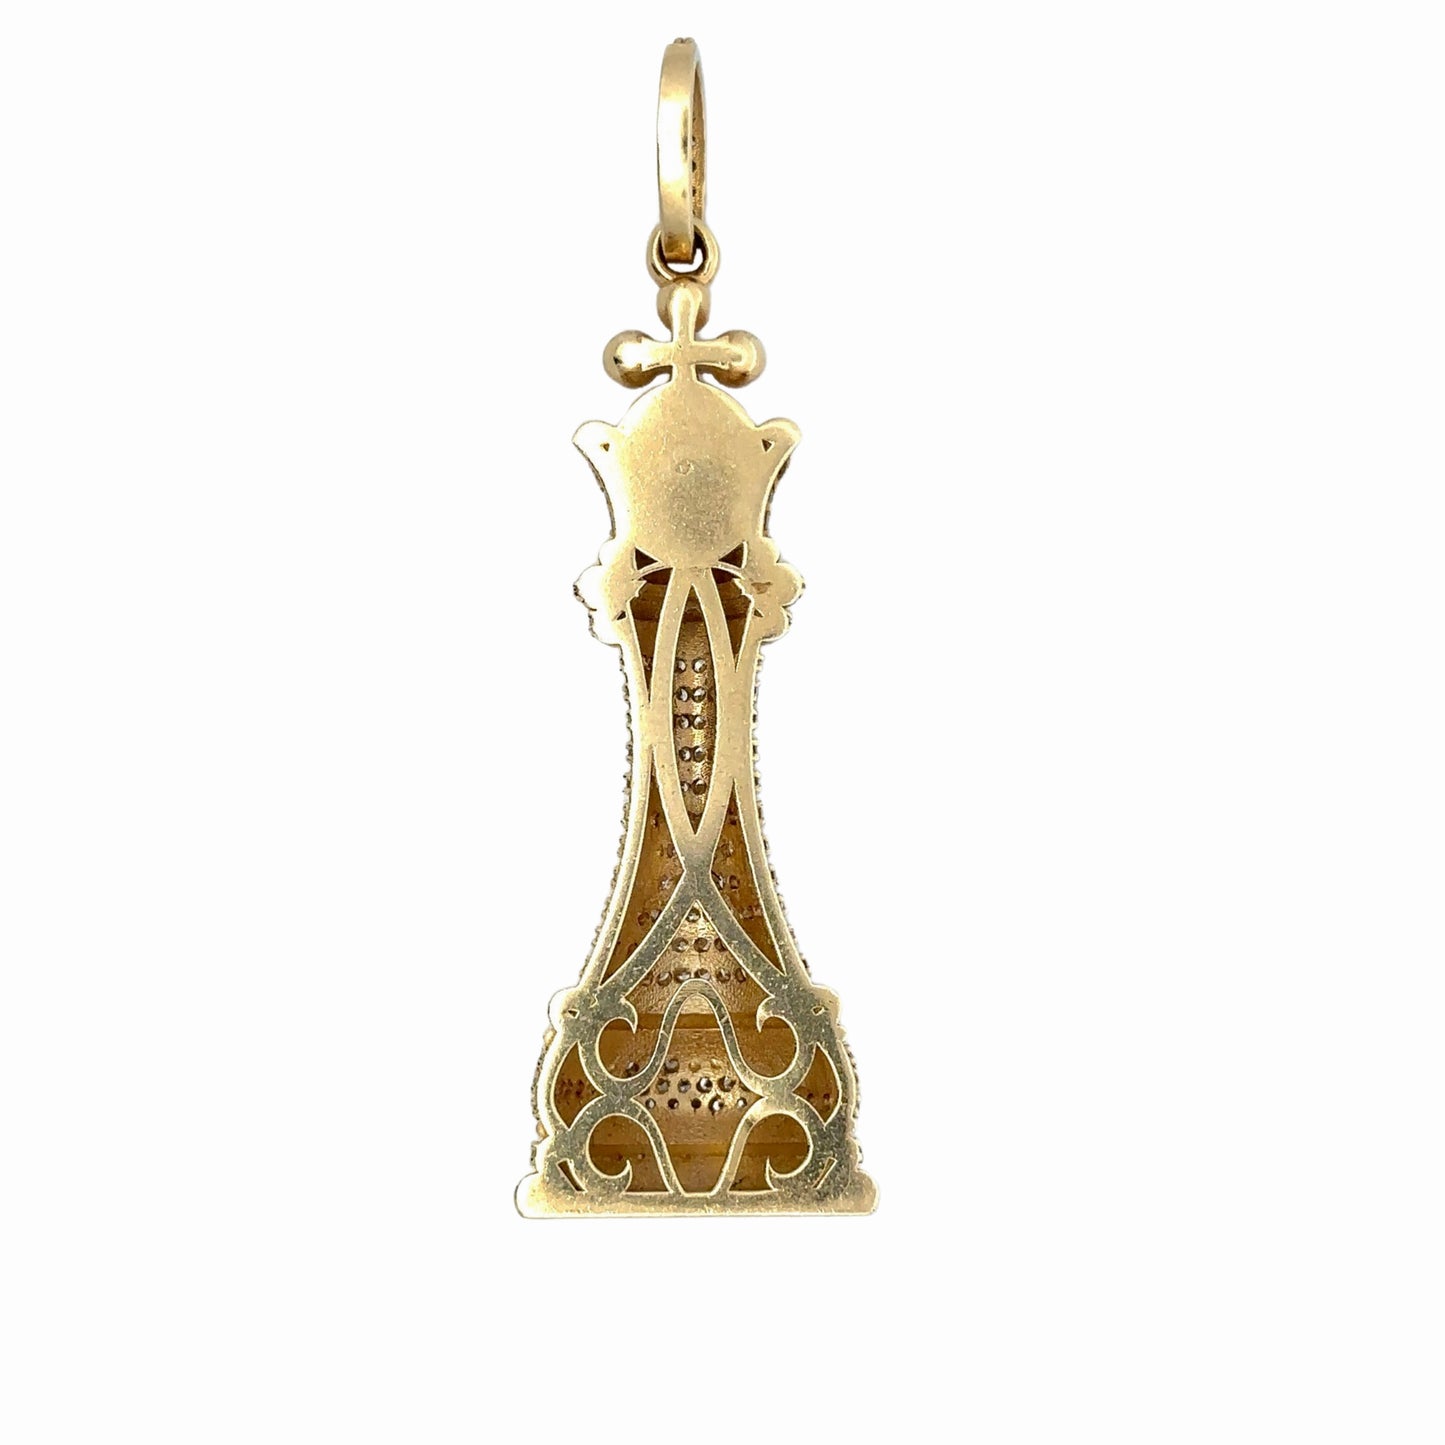 Back of yellow gold pendant with faint scratches. No diamonds on the back